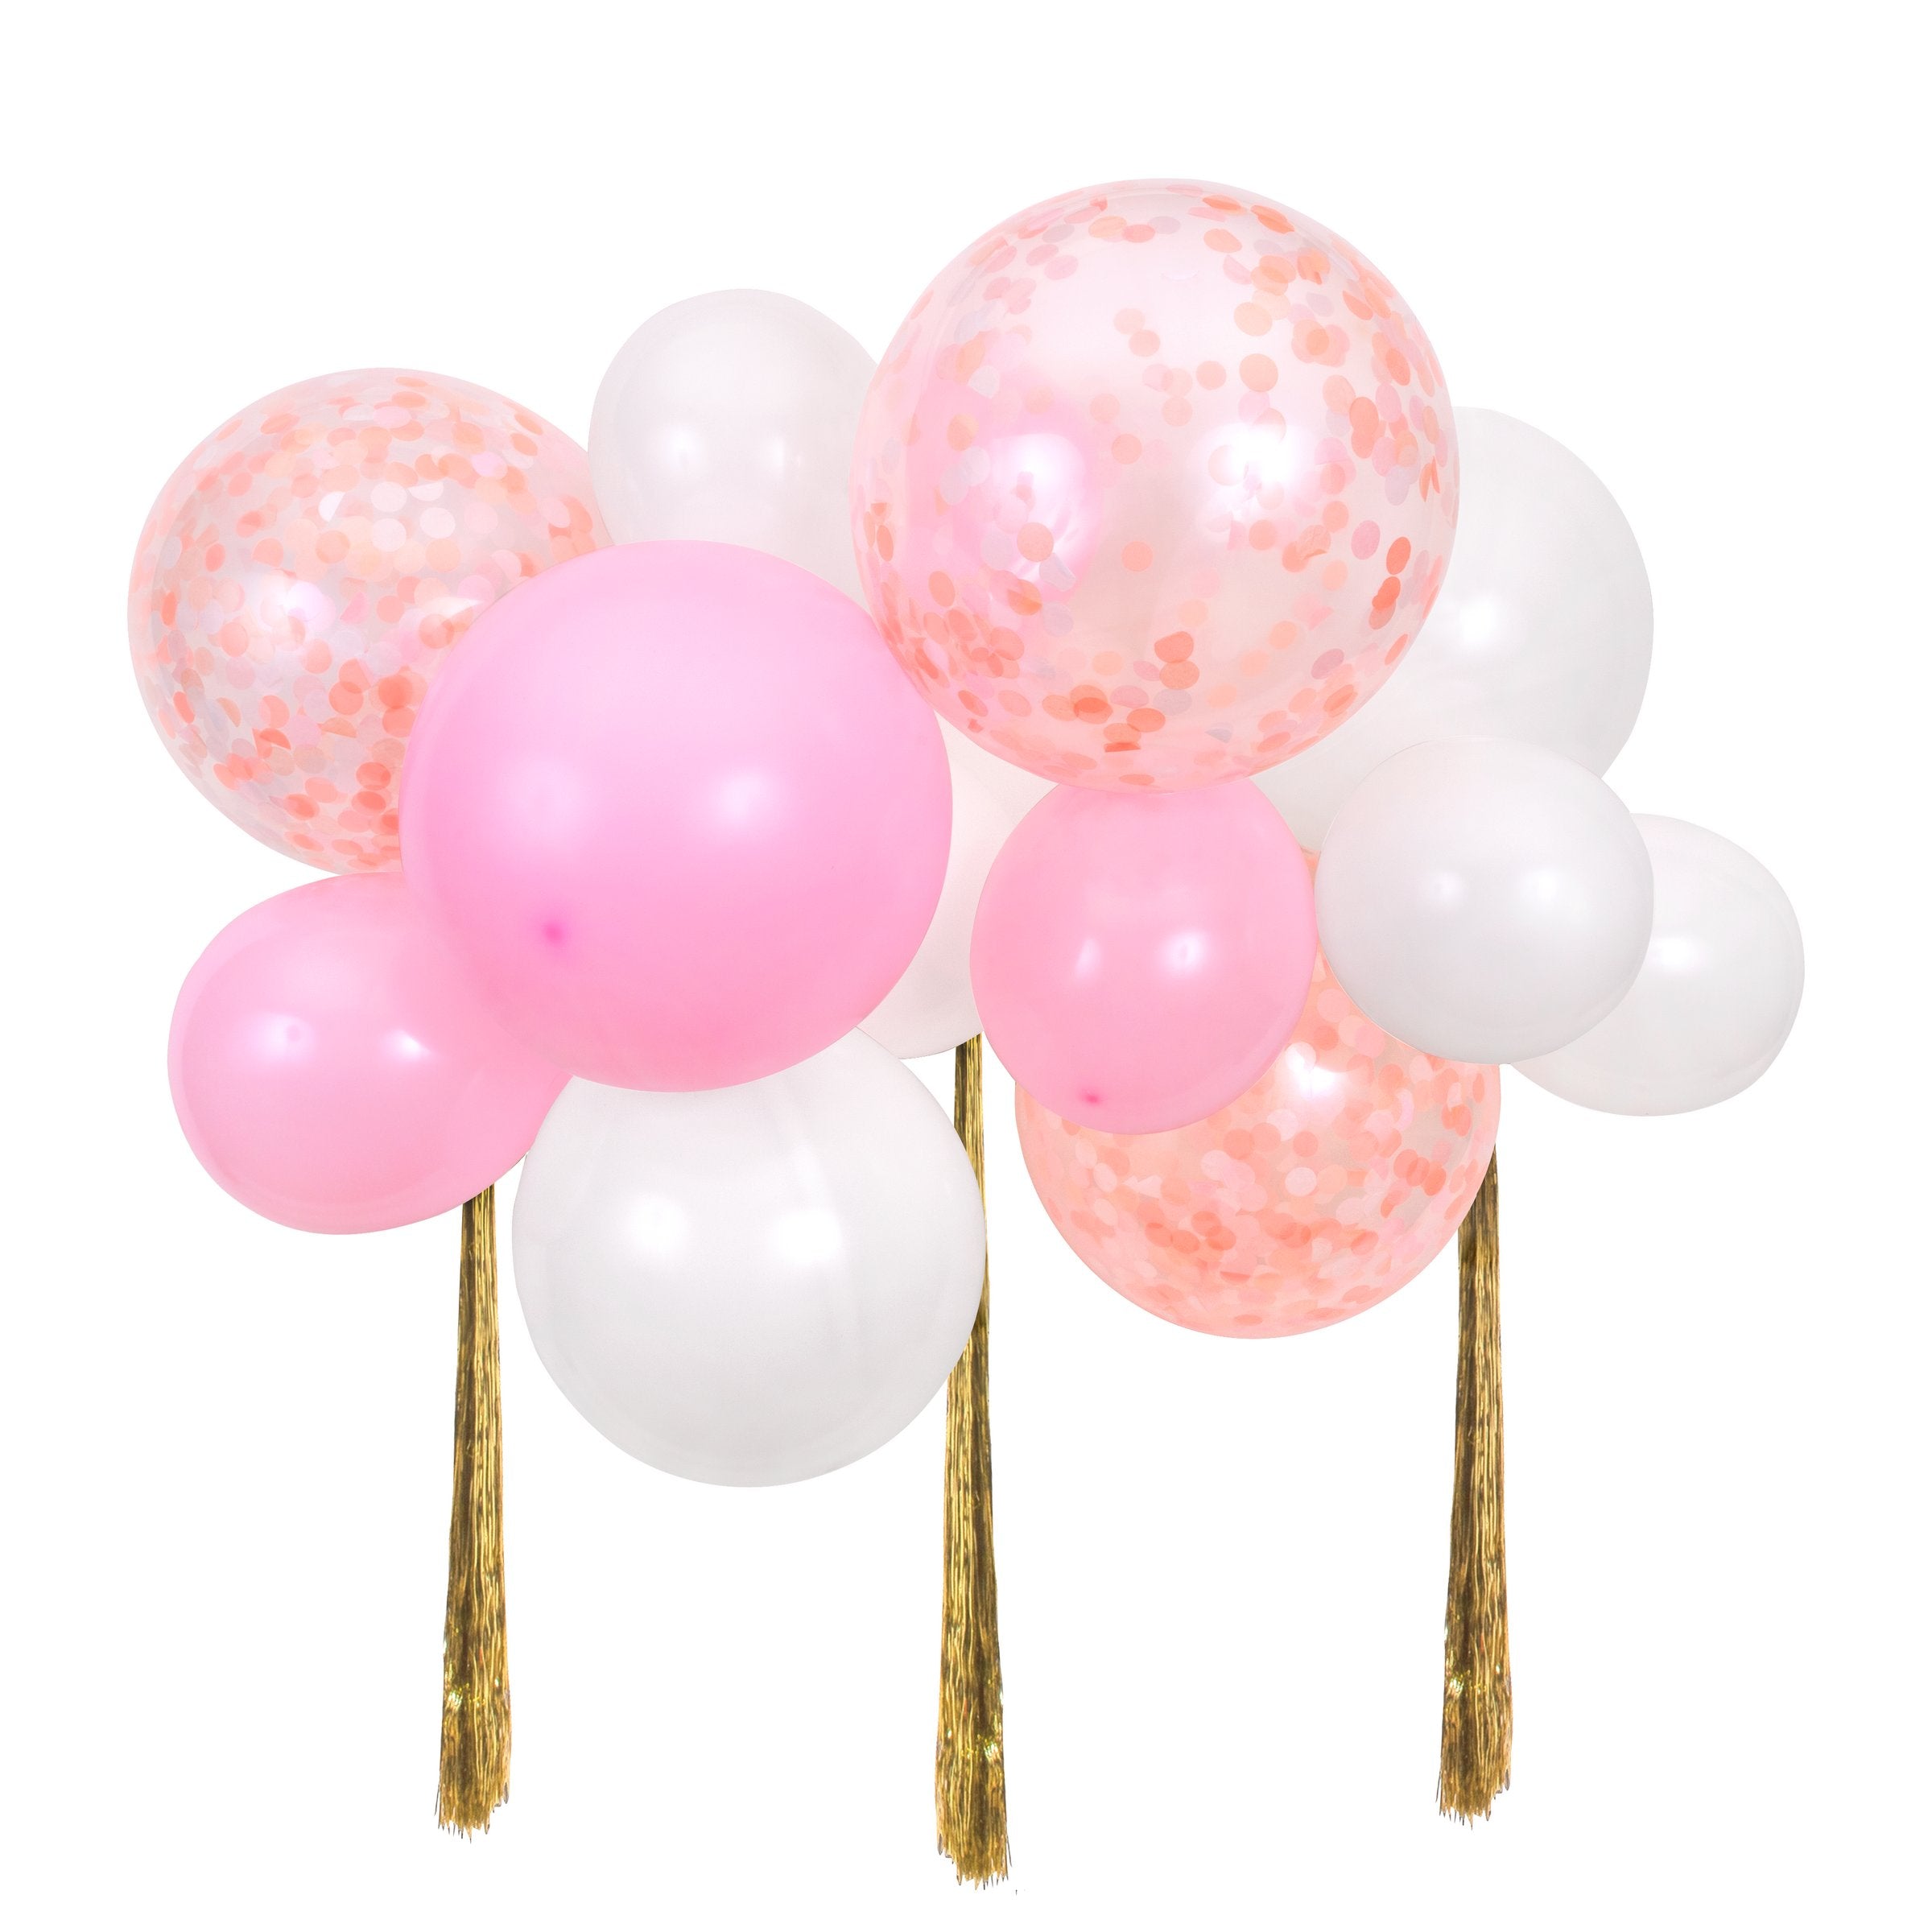 Our balloon kit includes pink balloons, white balloons, confetti balloons and gold streamers.